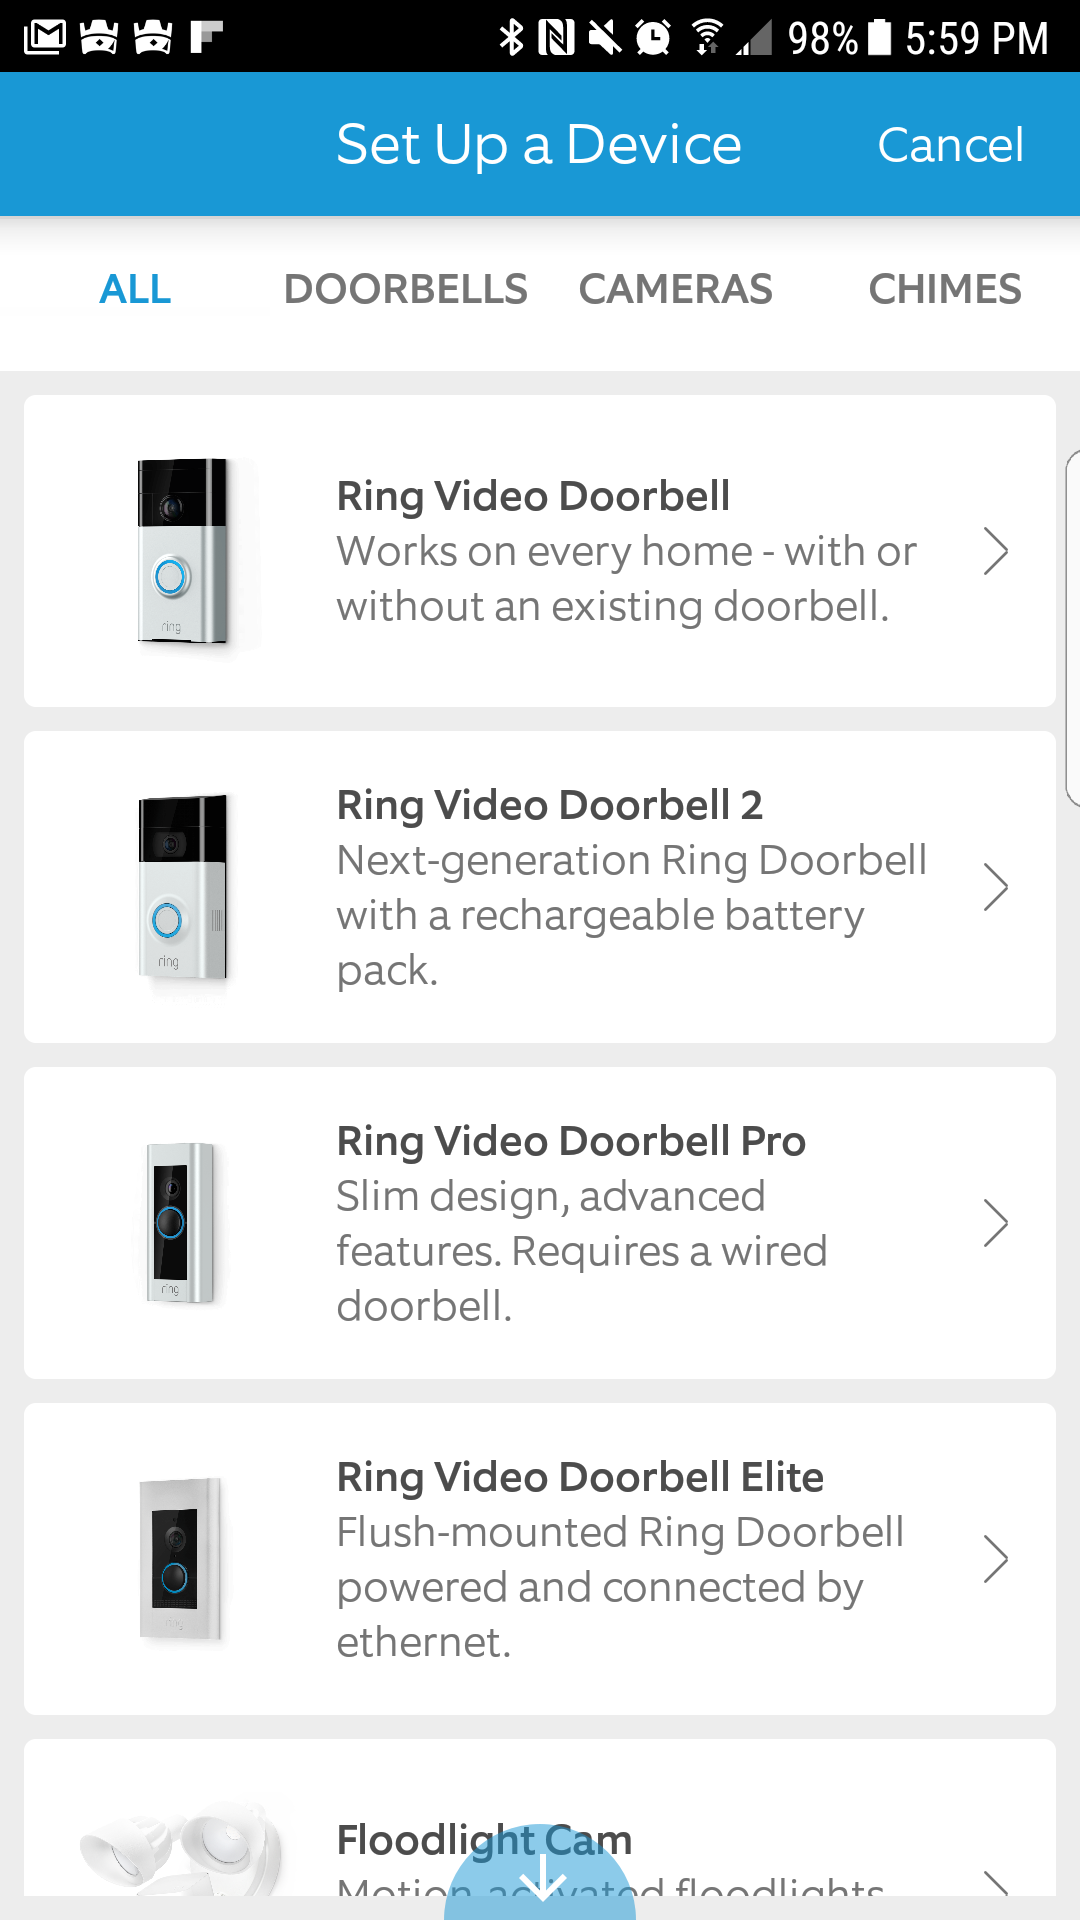 After setting up your account, you are asked which type of device you would like to setup. I chose Ring Video Doorbell.